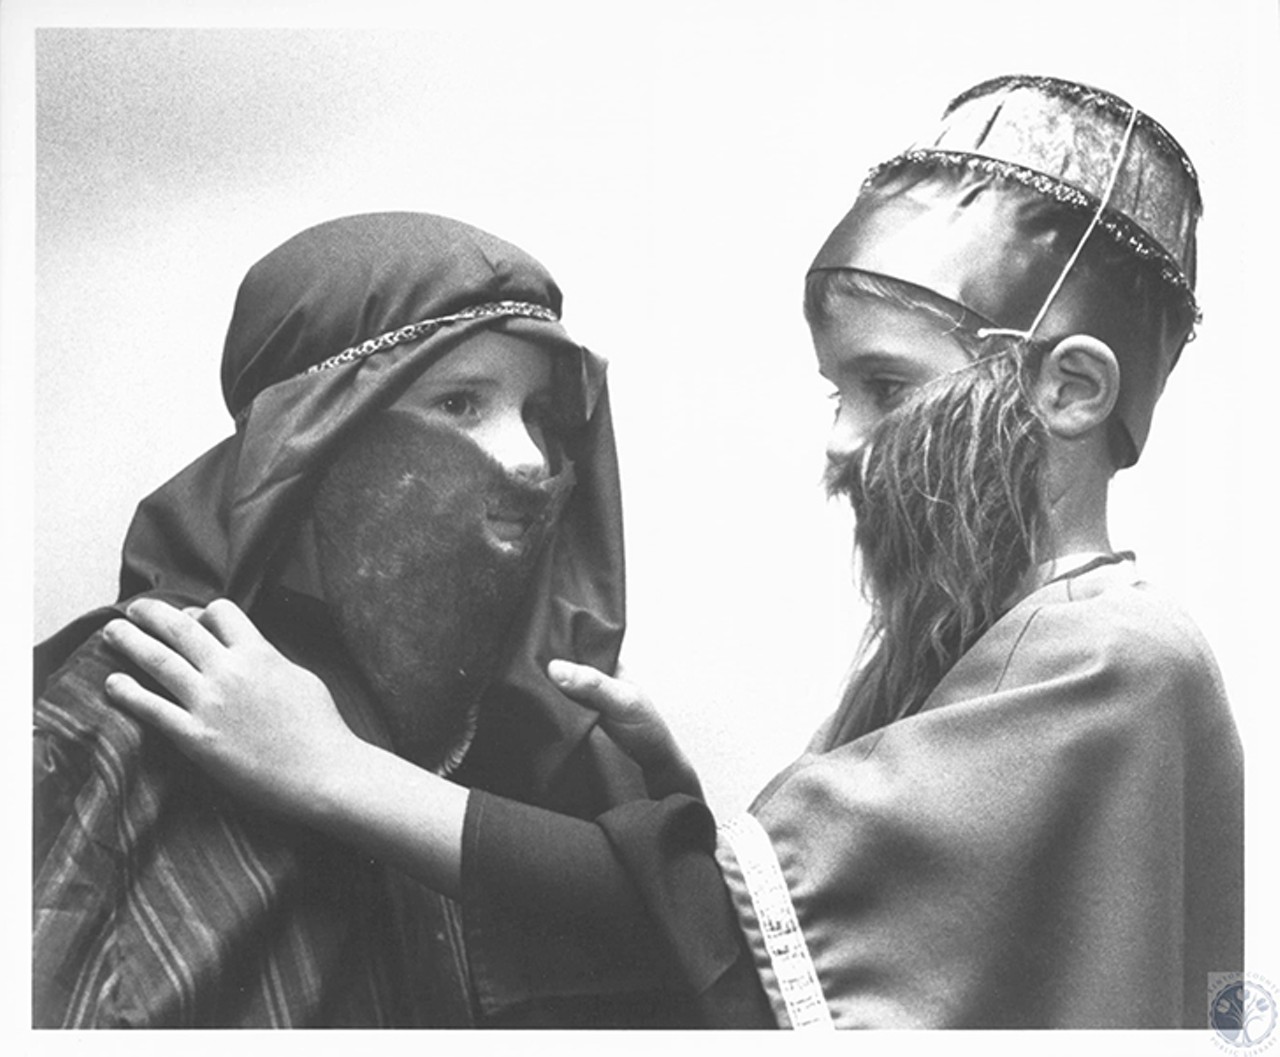 Florence,1991
"Aaron Adams (9) and Terry Snelling (8) check out each other's costumes before appearing in play at First Church of Christ"